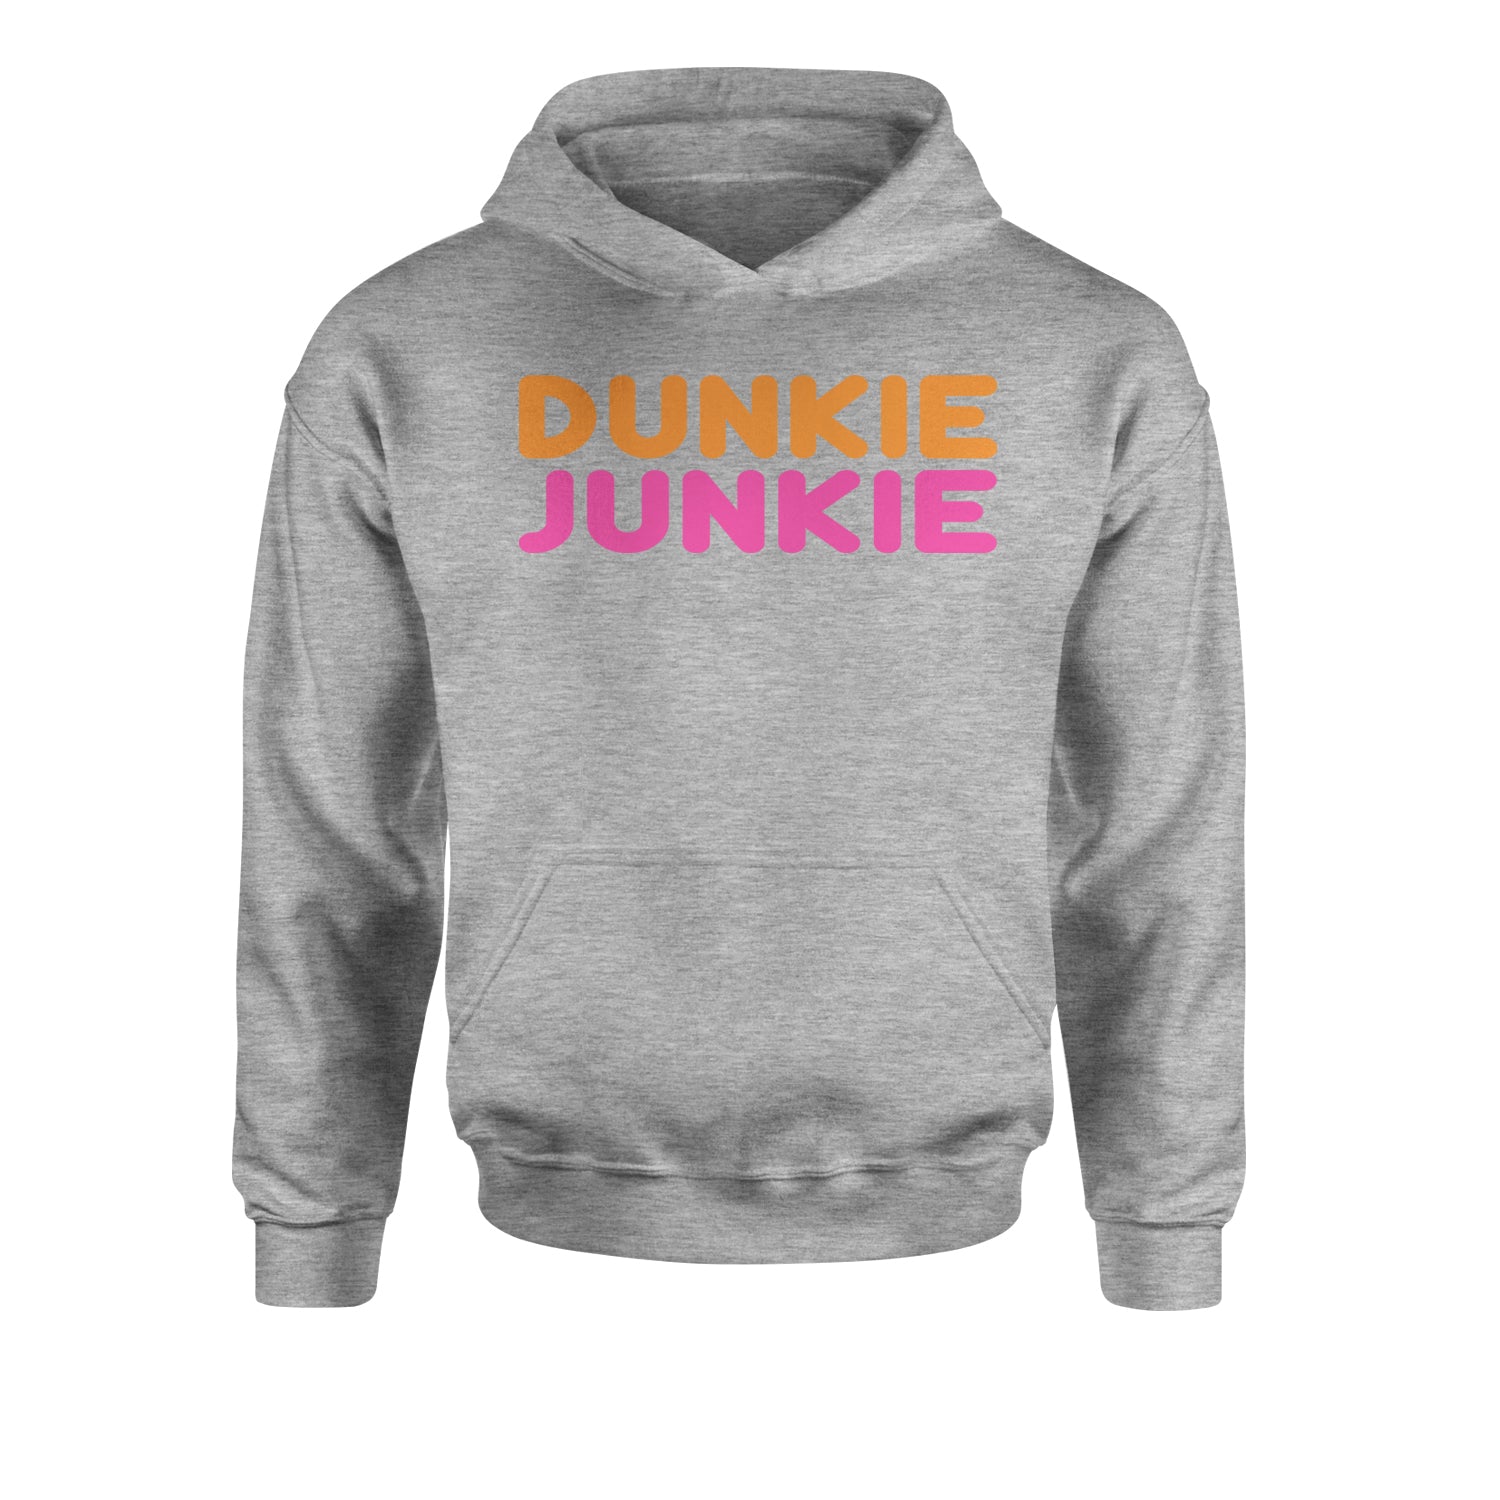 Dunkie Junkie Youth-Sized Hoodie addict, capuccino, coffee, dd, dnkn, dunkin, dunking, latte by Expression Tees